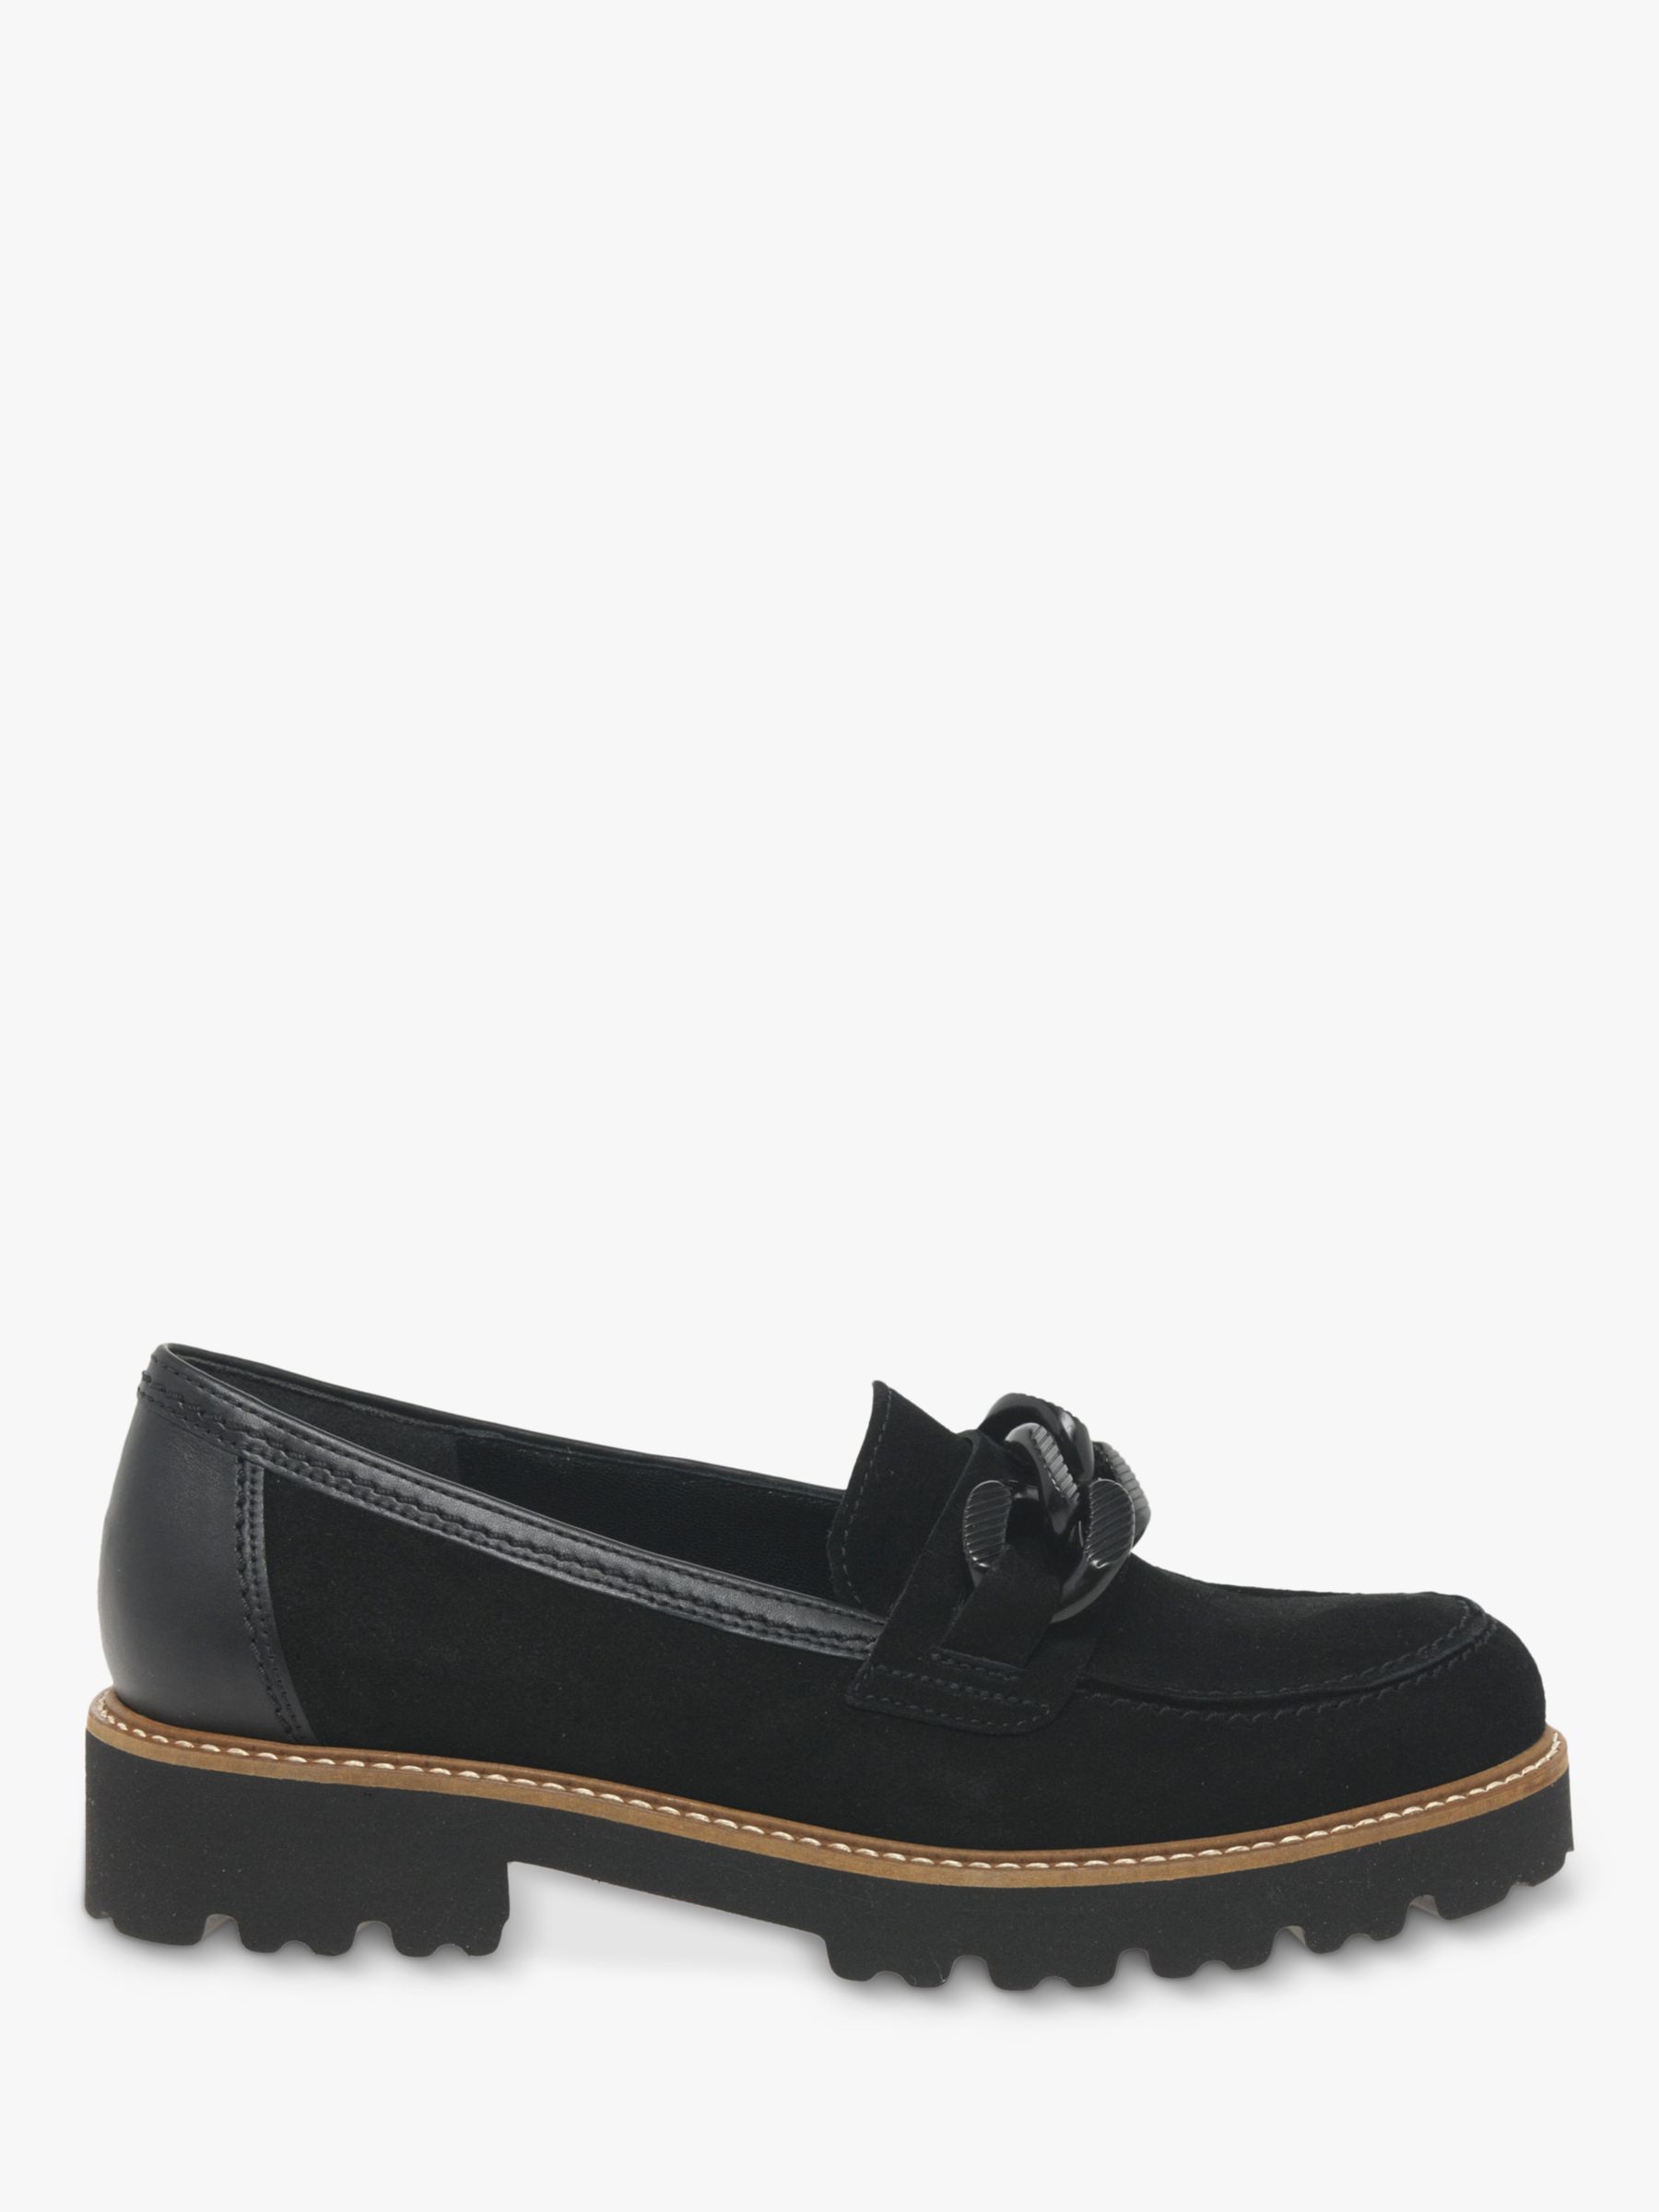 Gabor Squeeze Suede Loafers, Black at John Lewis & Partners